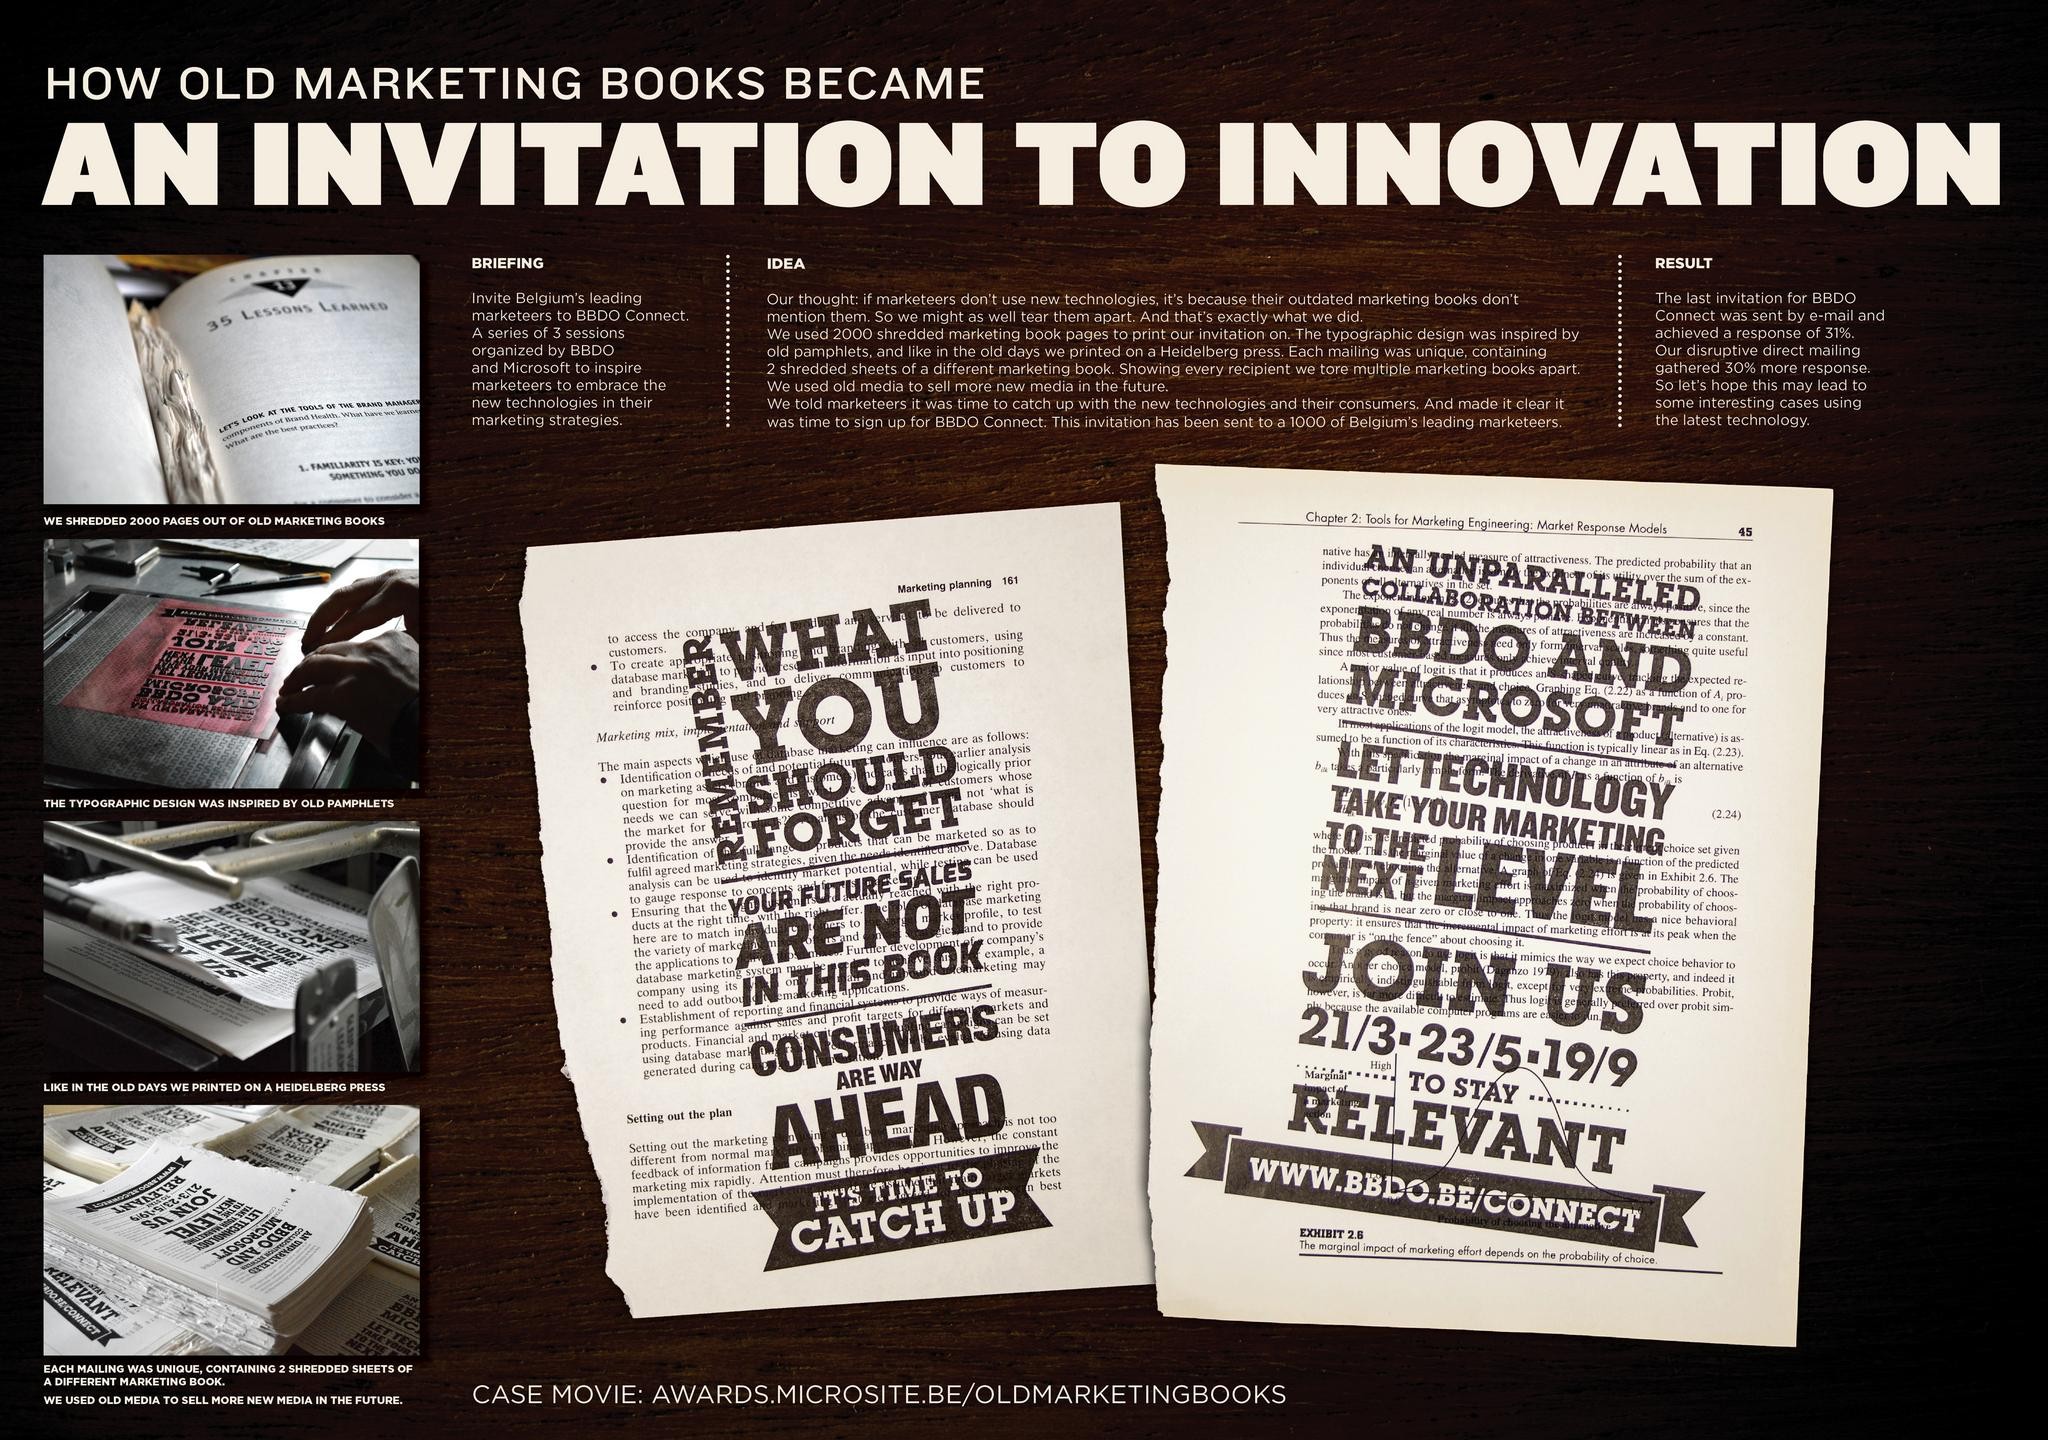 OLD MARKETING BOOKS: AN INVITATION TO INNOVATION